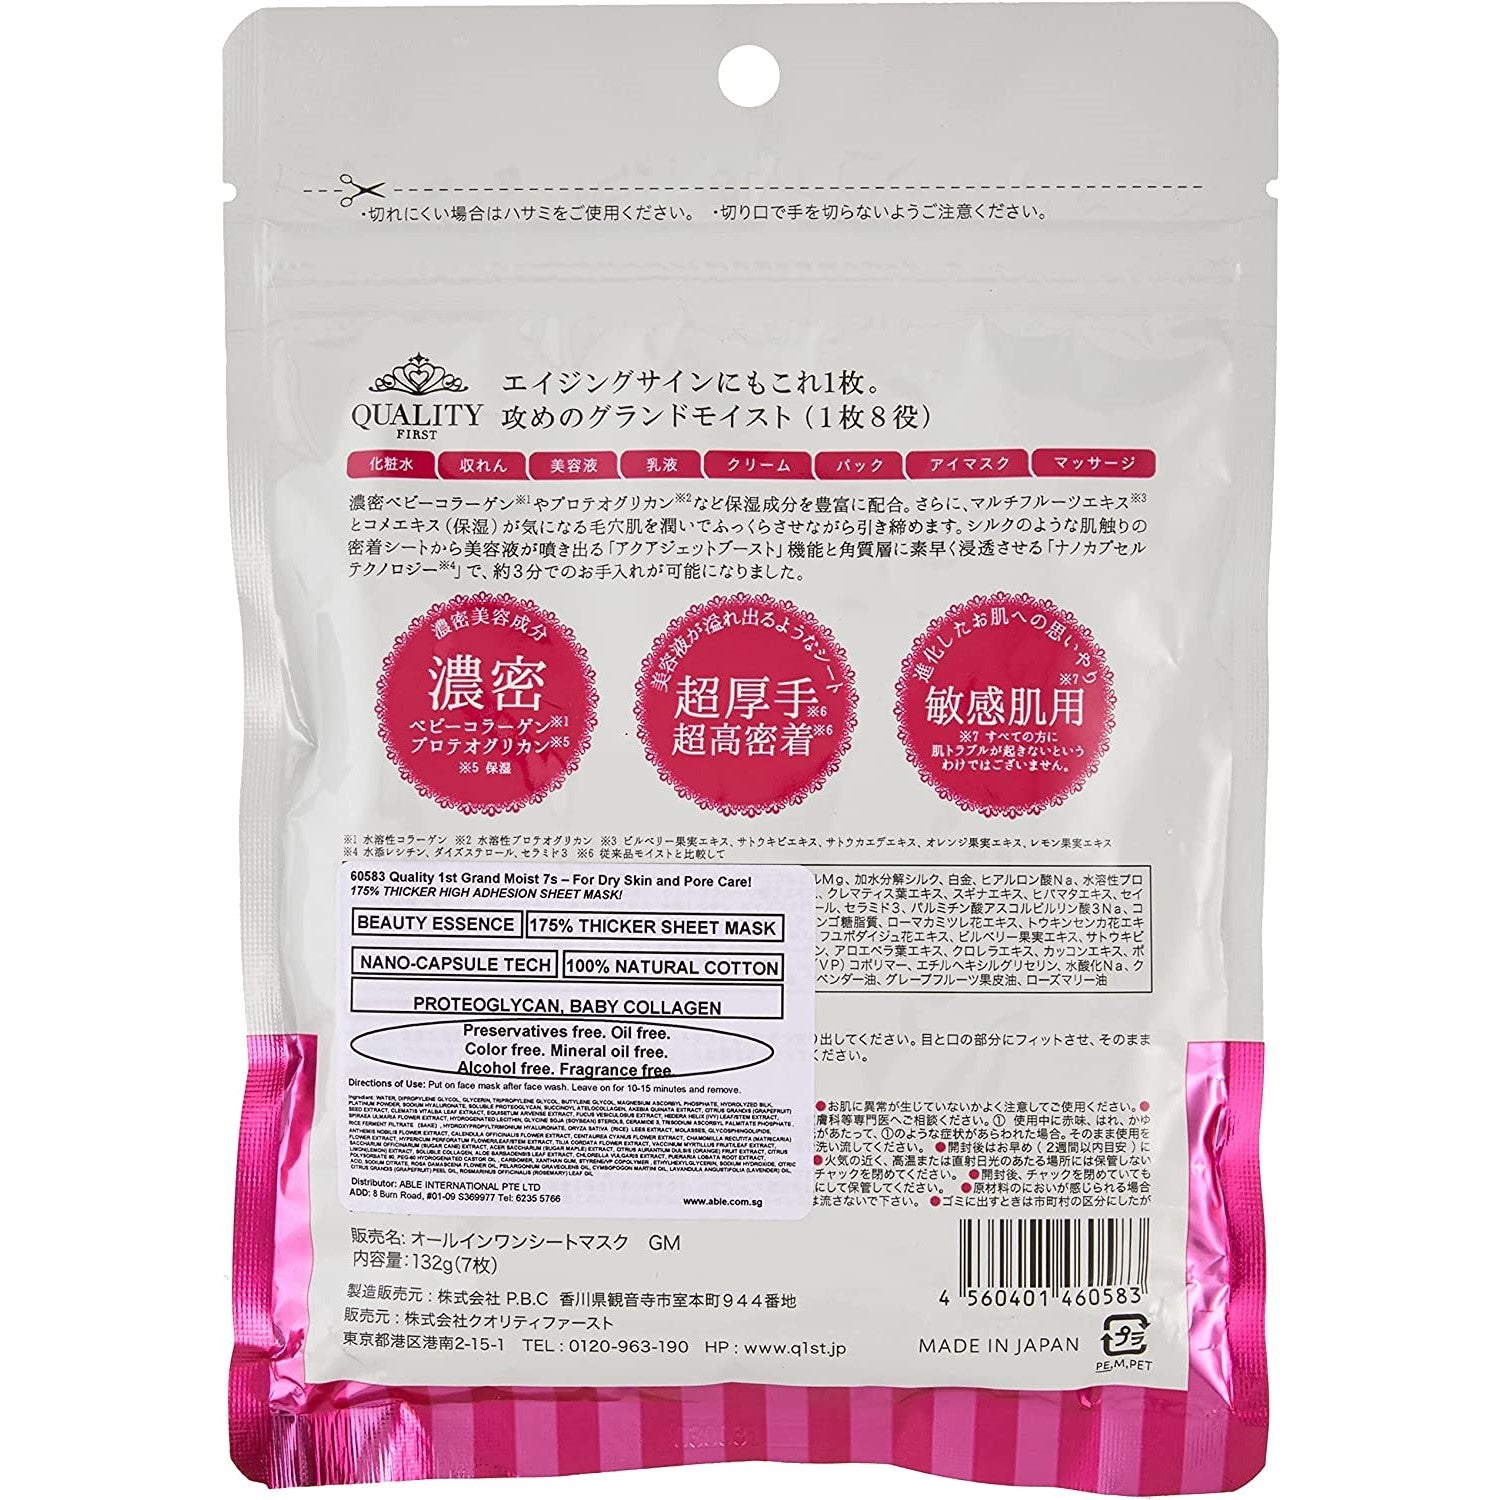 Quality First All in One Sheet Mask Grand Moist 7pcs - Cosme No.1